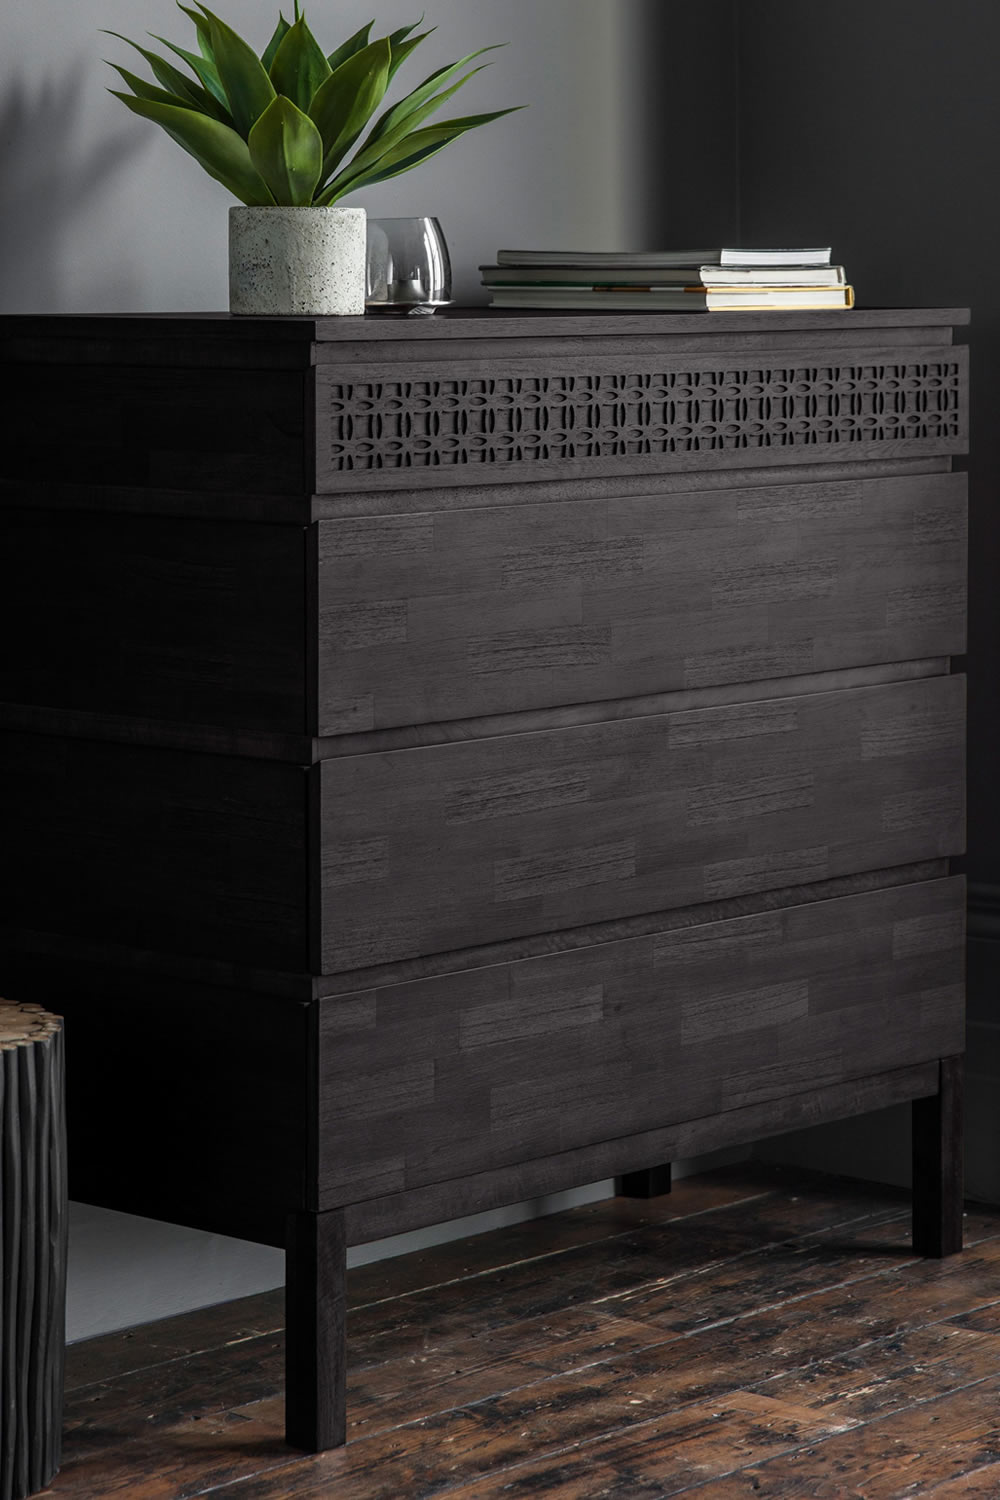 View Boho Black Wooden FourDrawer Chest Bedroom Storage For Clothes Crafted From Mango Solids Timber Veneers MDF Fretwork Drawer Front information